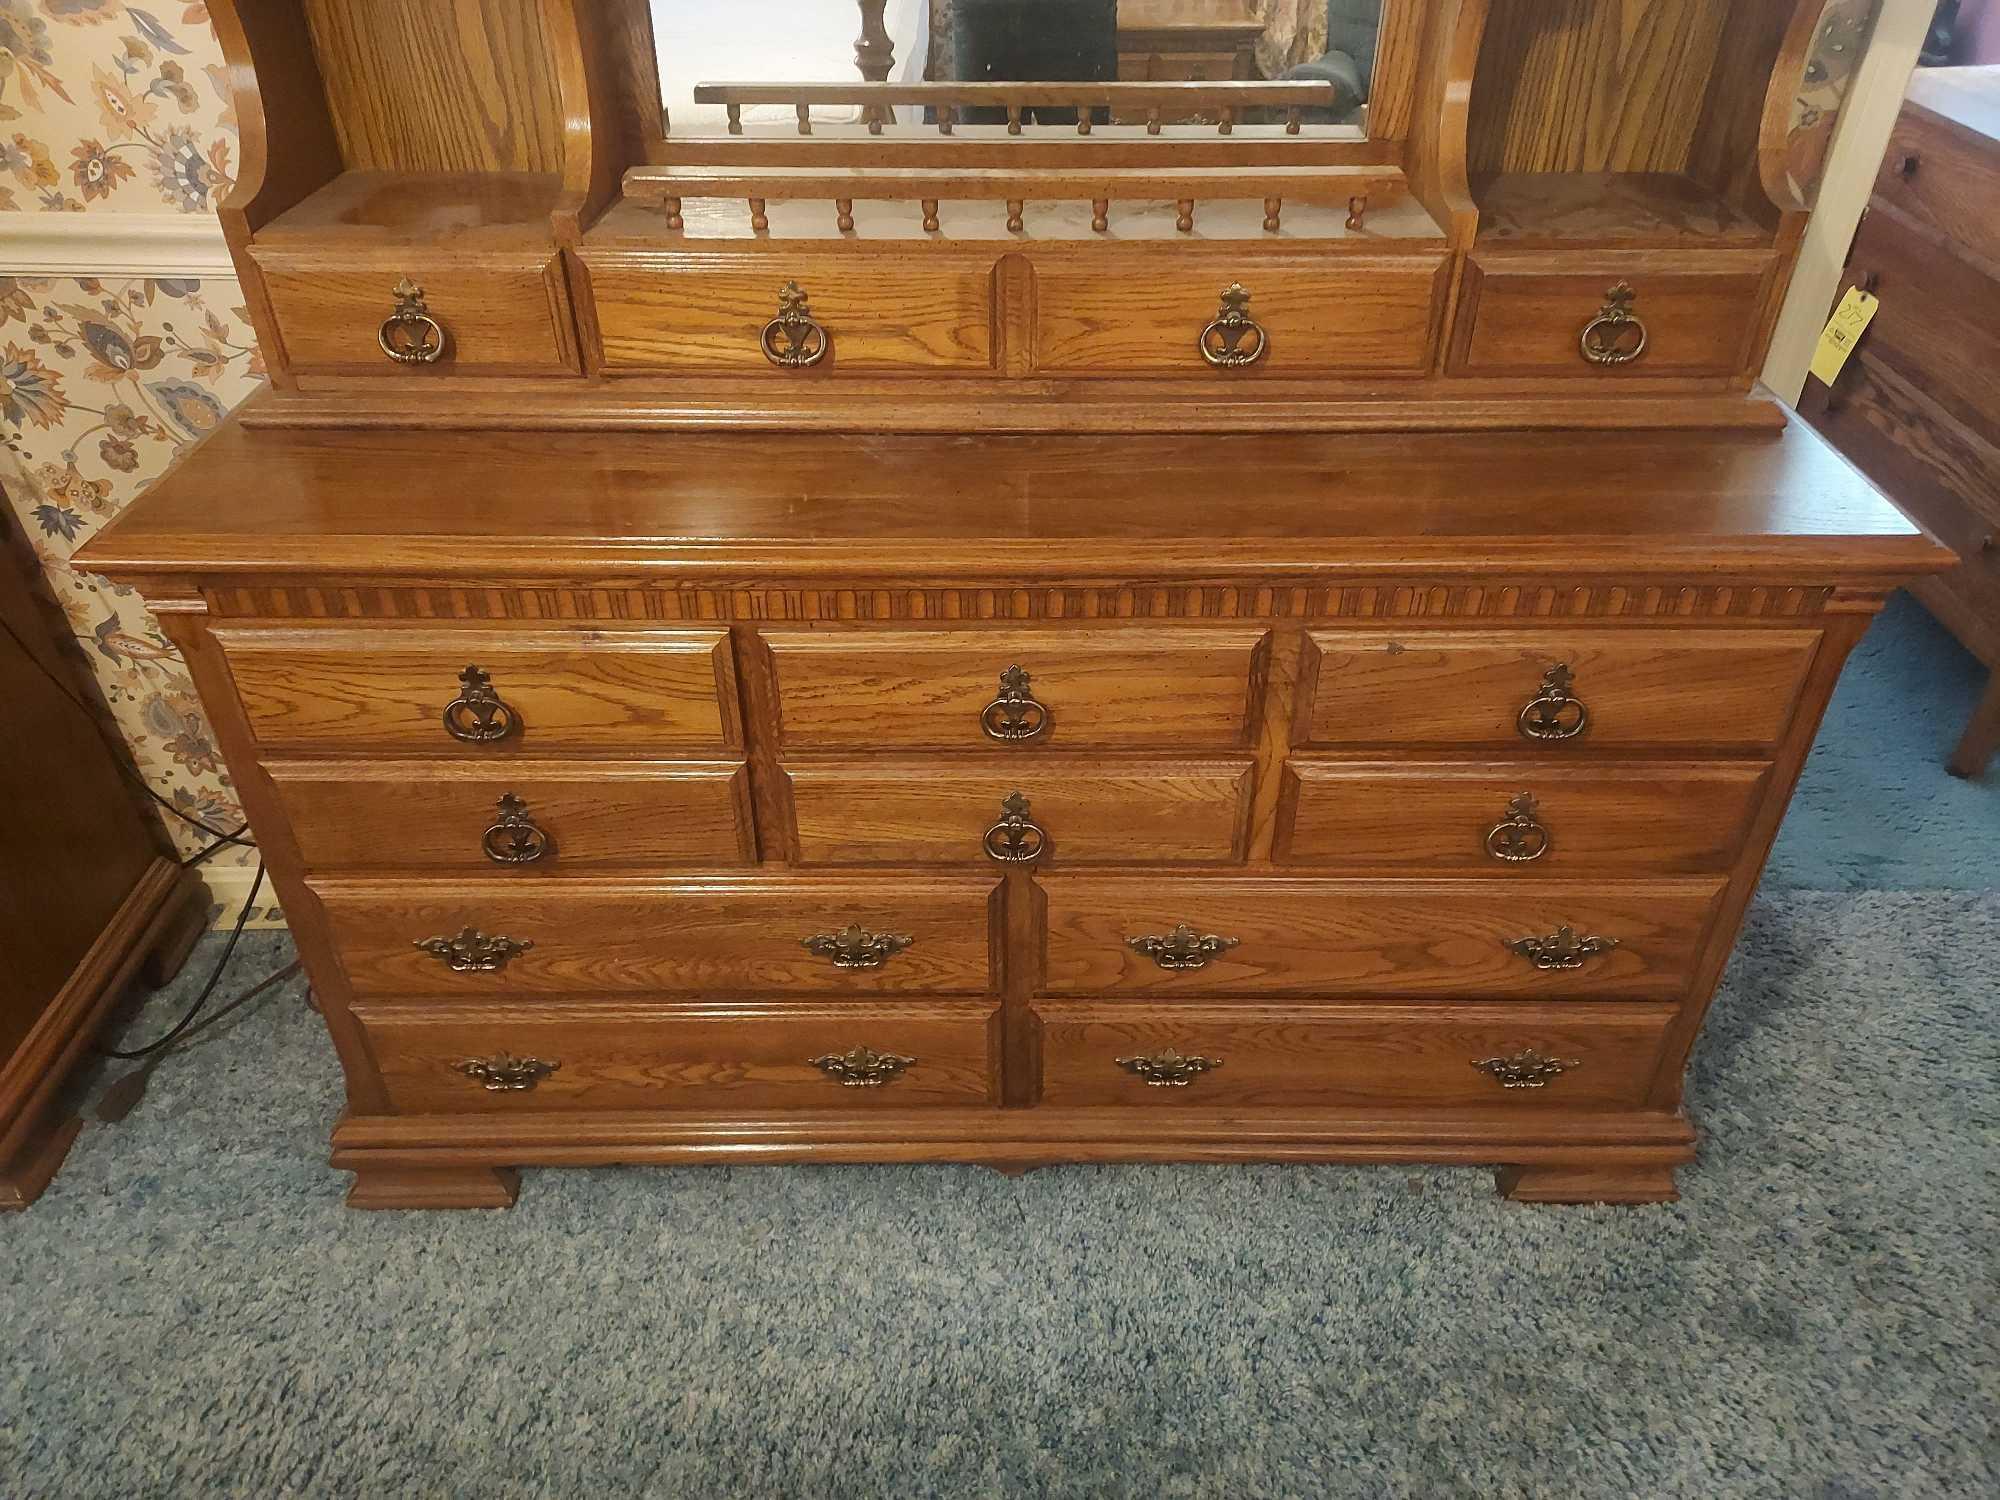 4 Piece Solid Oak Bedroom Set - Full Size Bed, Dresser, Chest of Drawers, & Nightstand